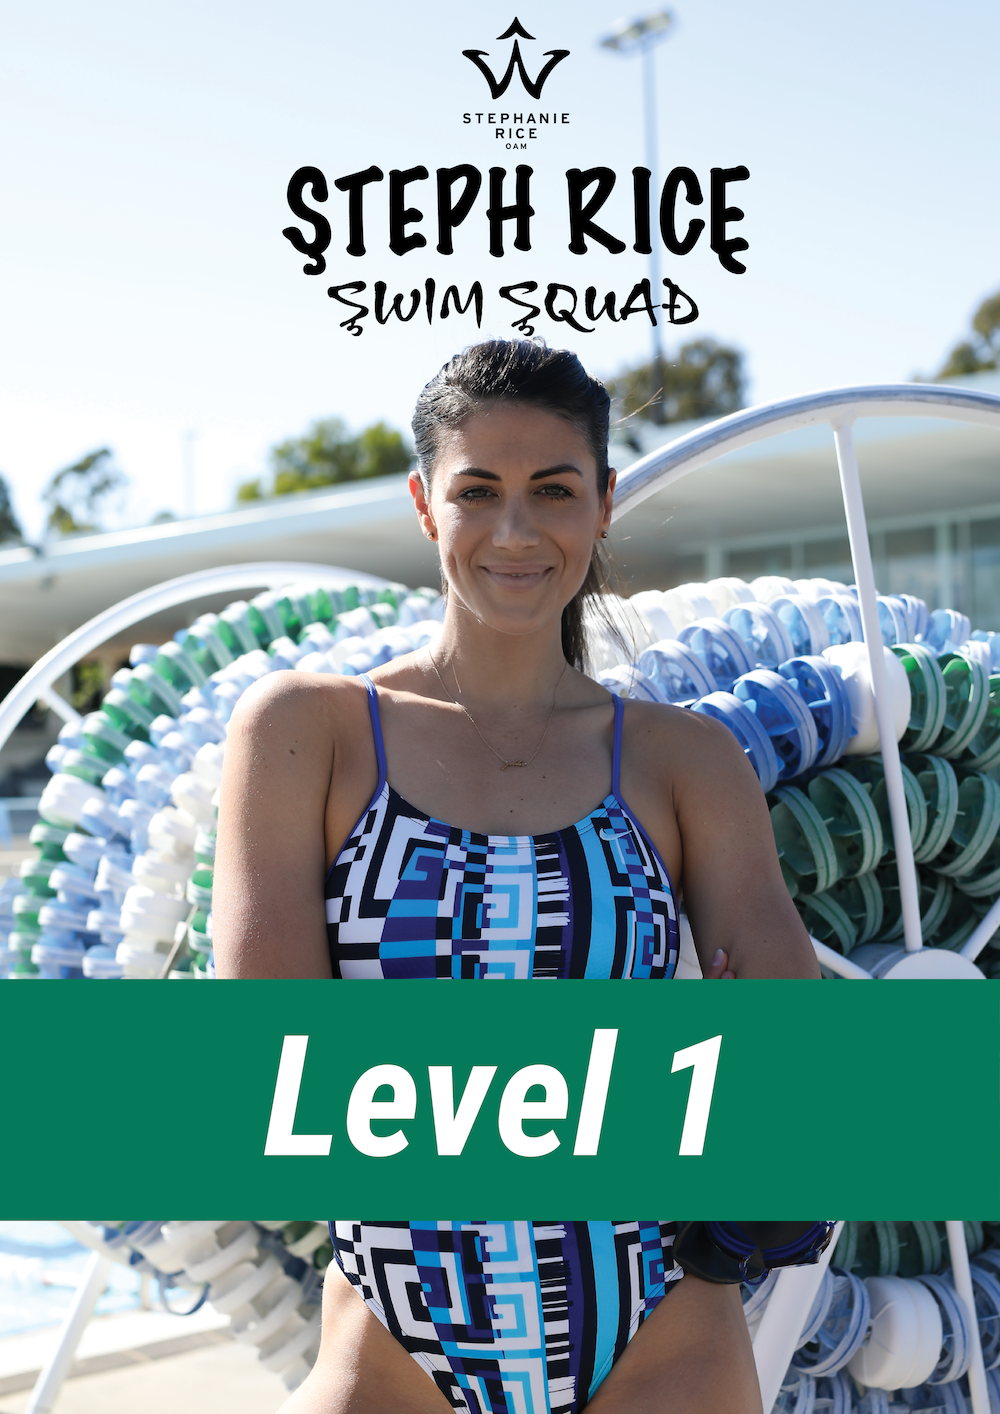 Level 1 - (600m - 1.5km) eBook ONLY